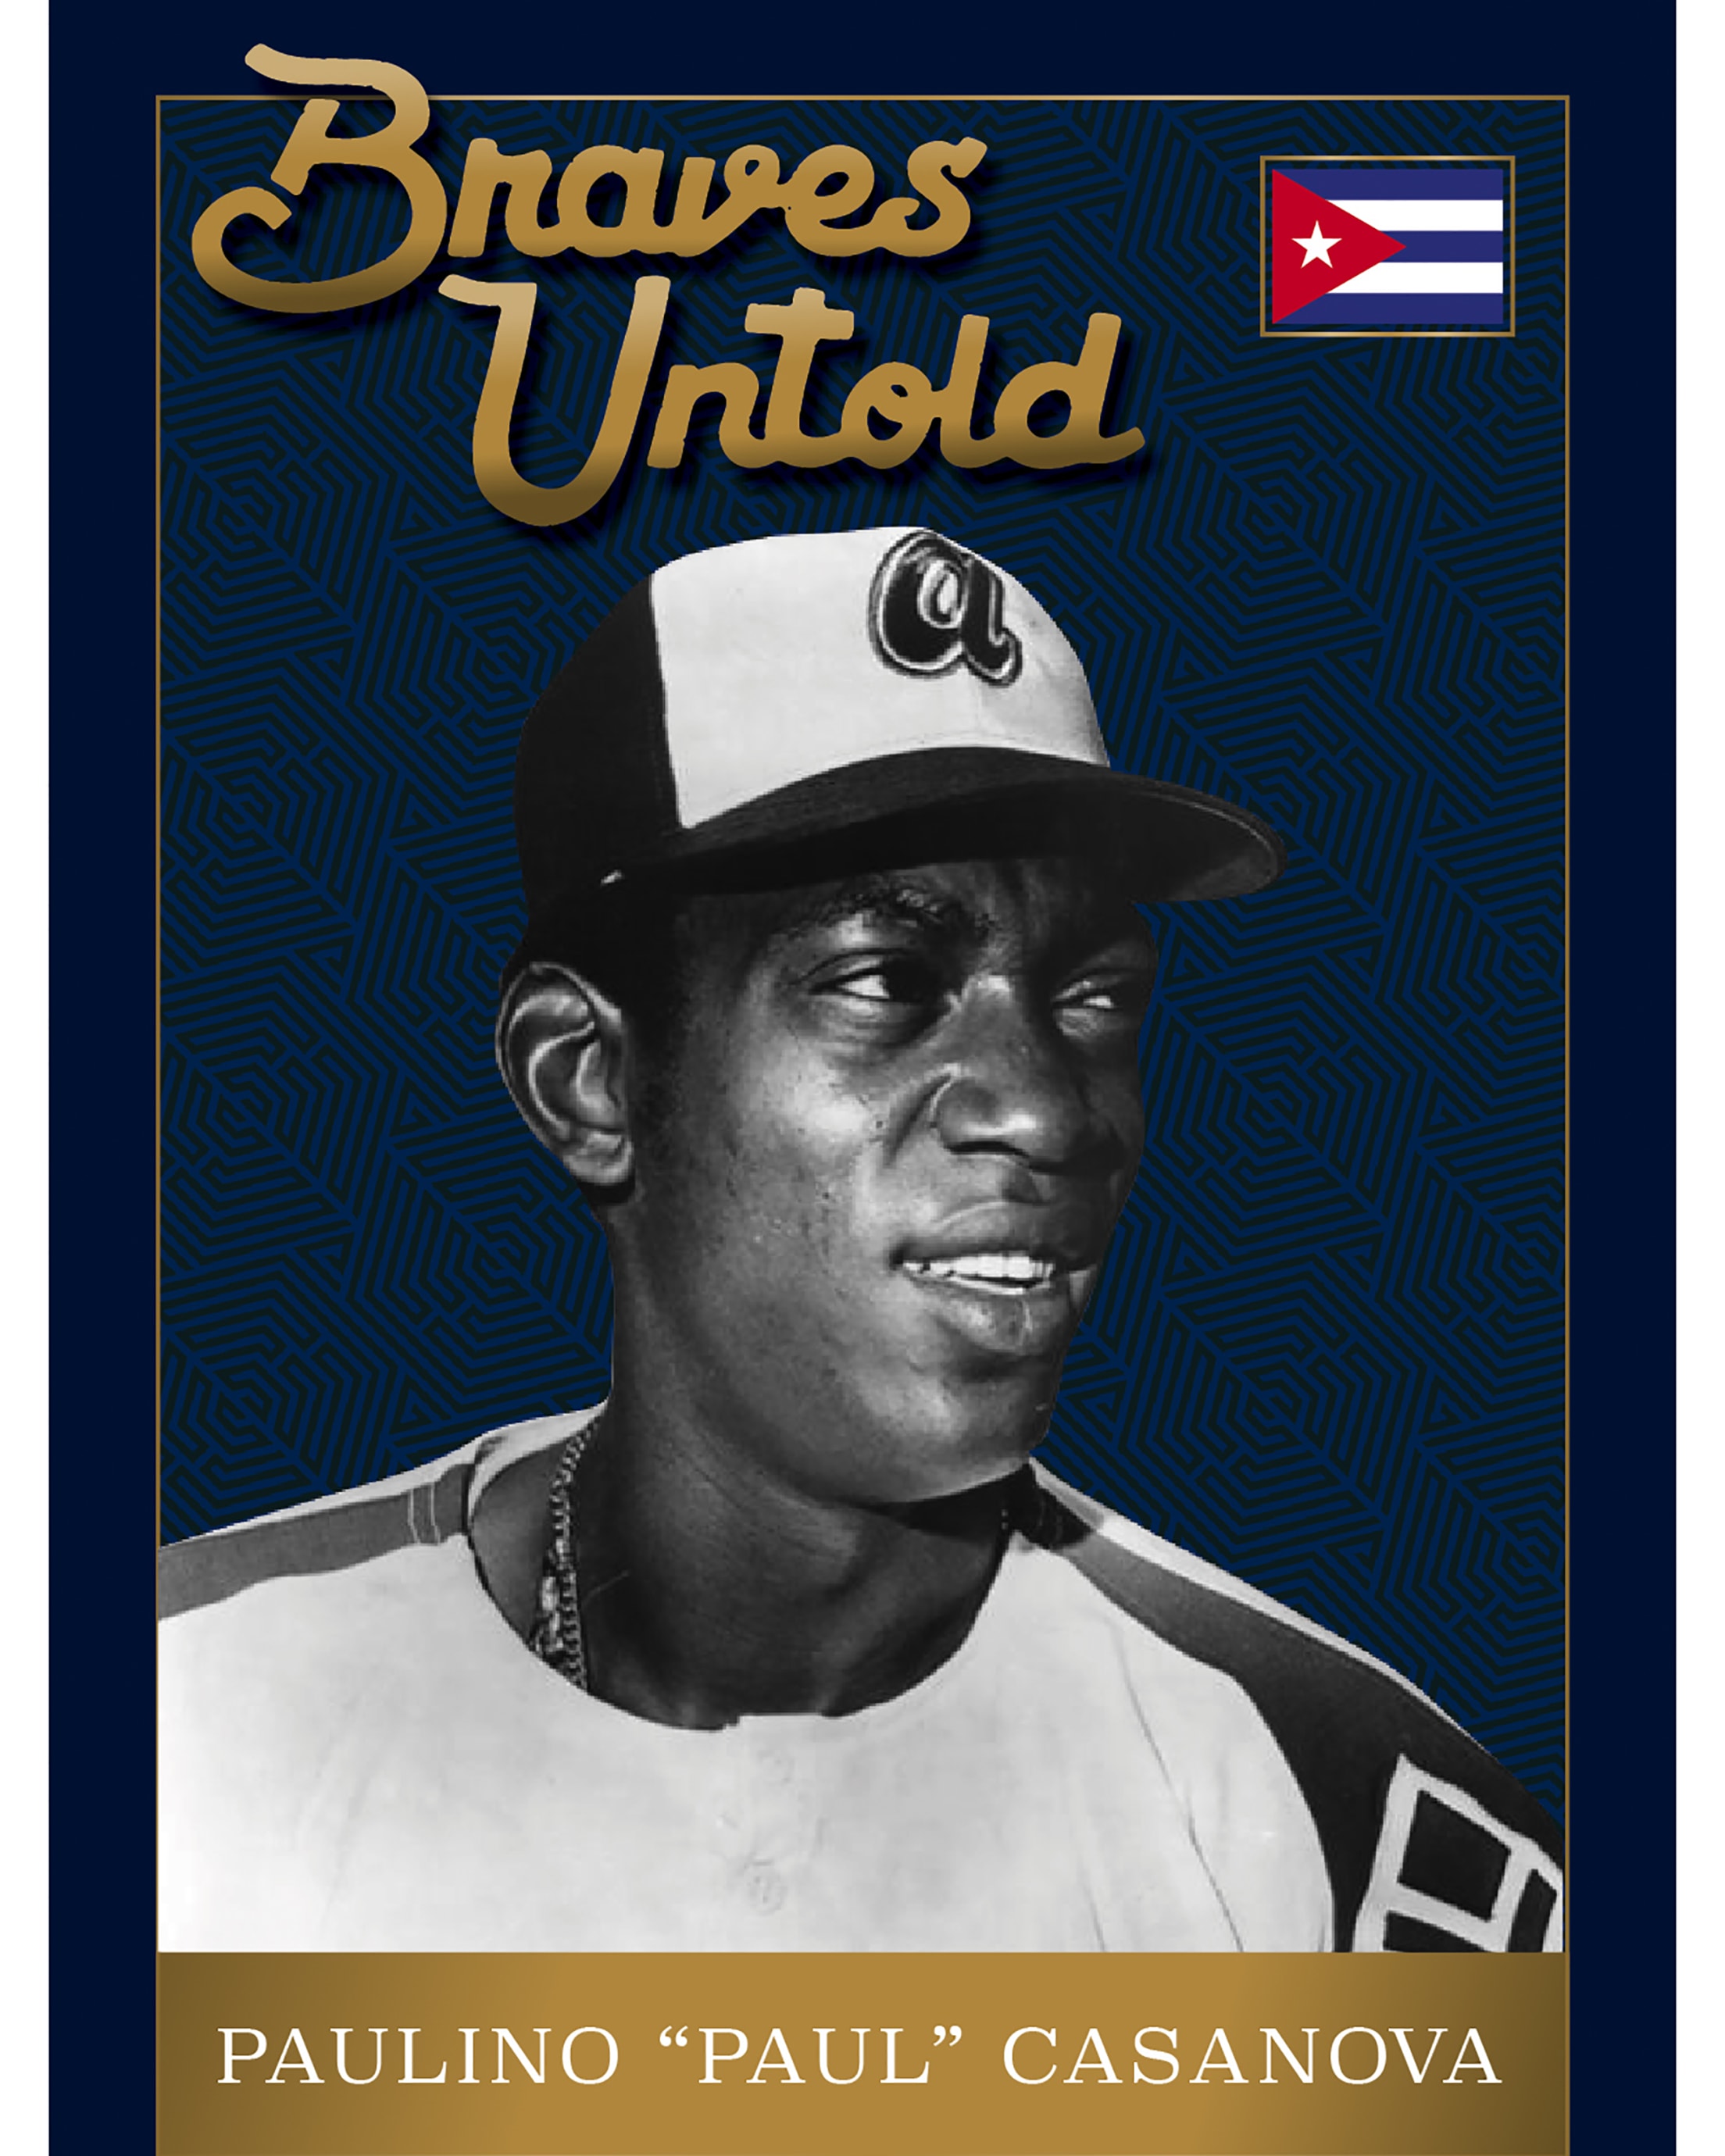 Braves History of Ball Caps Poster